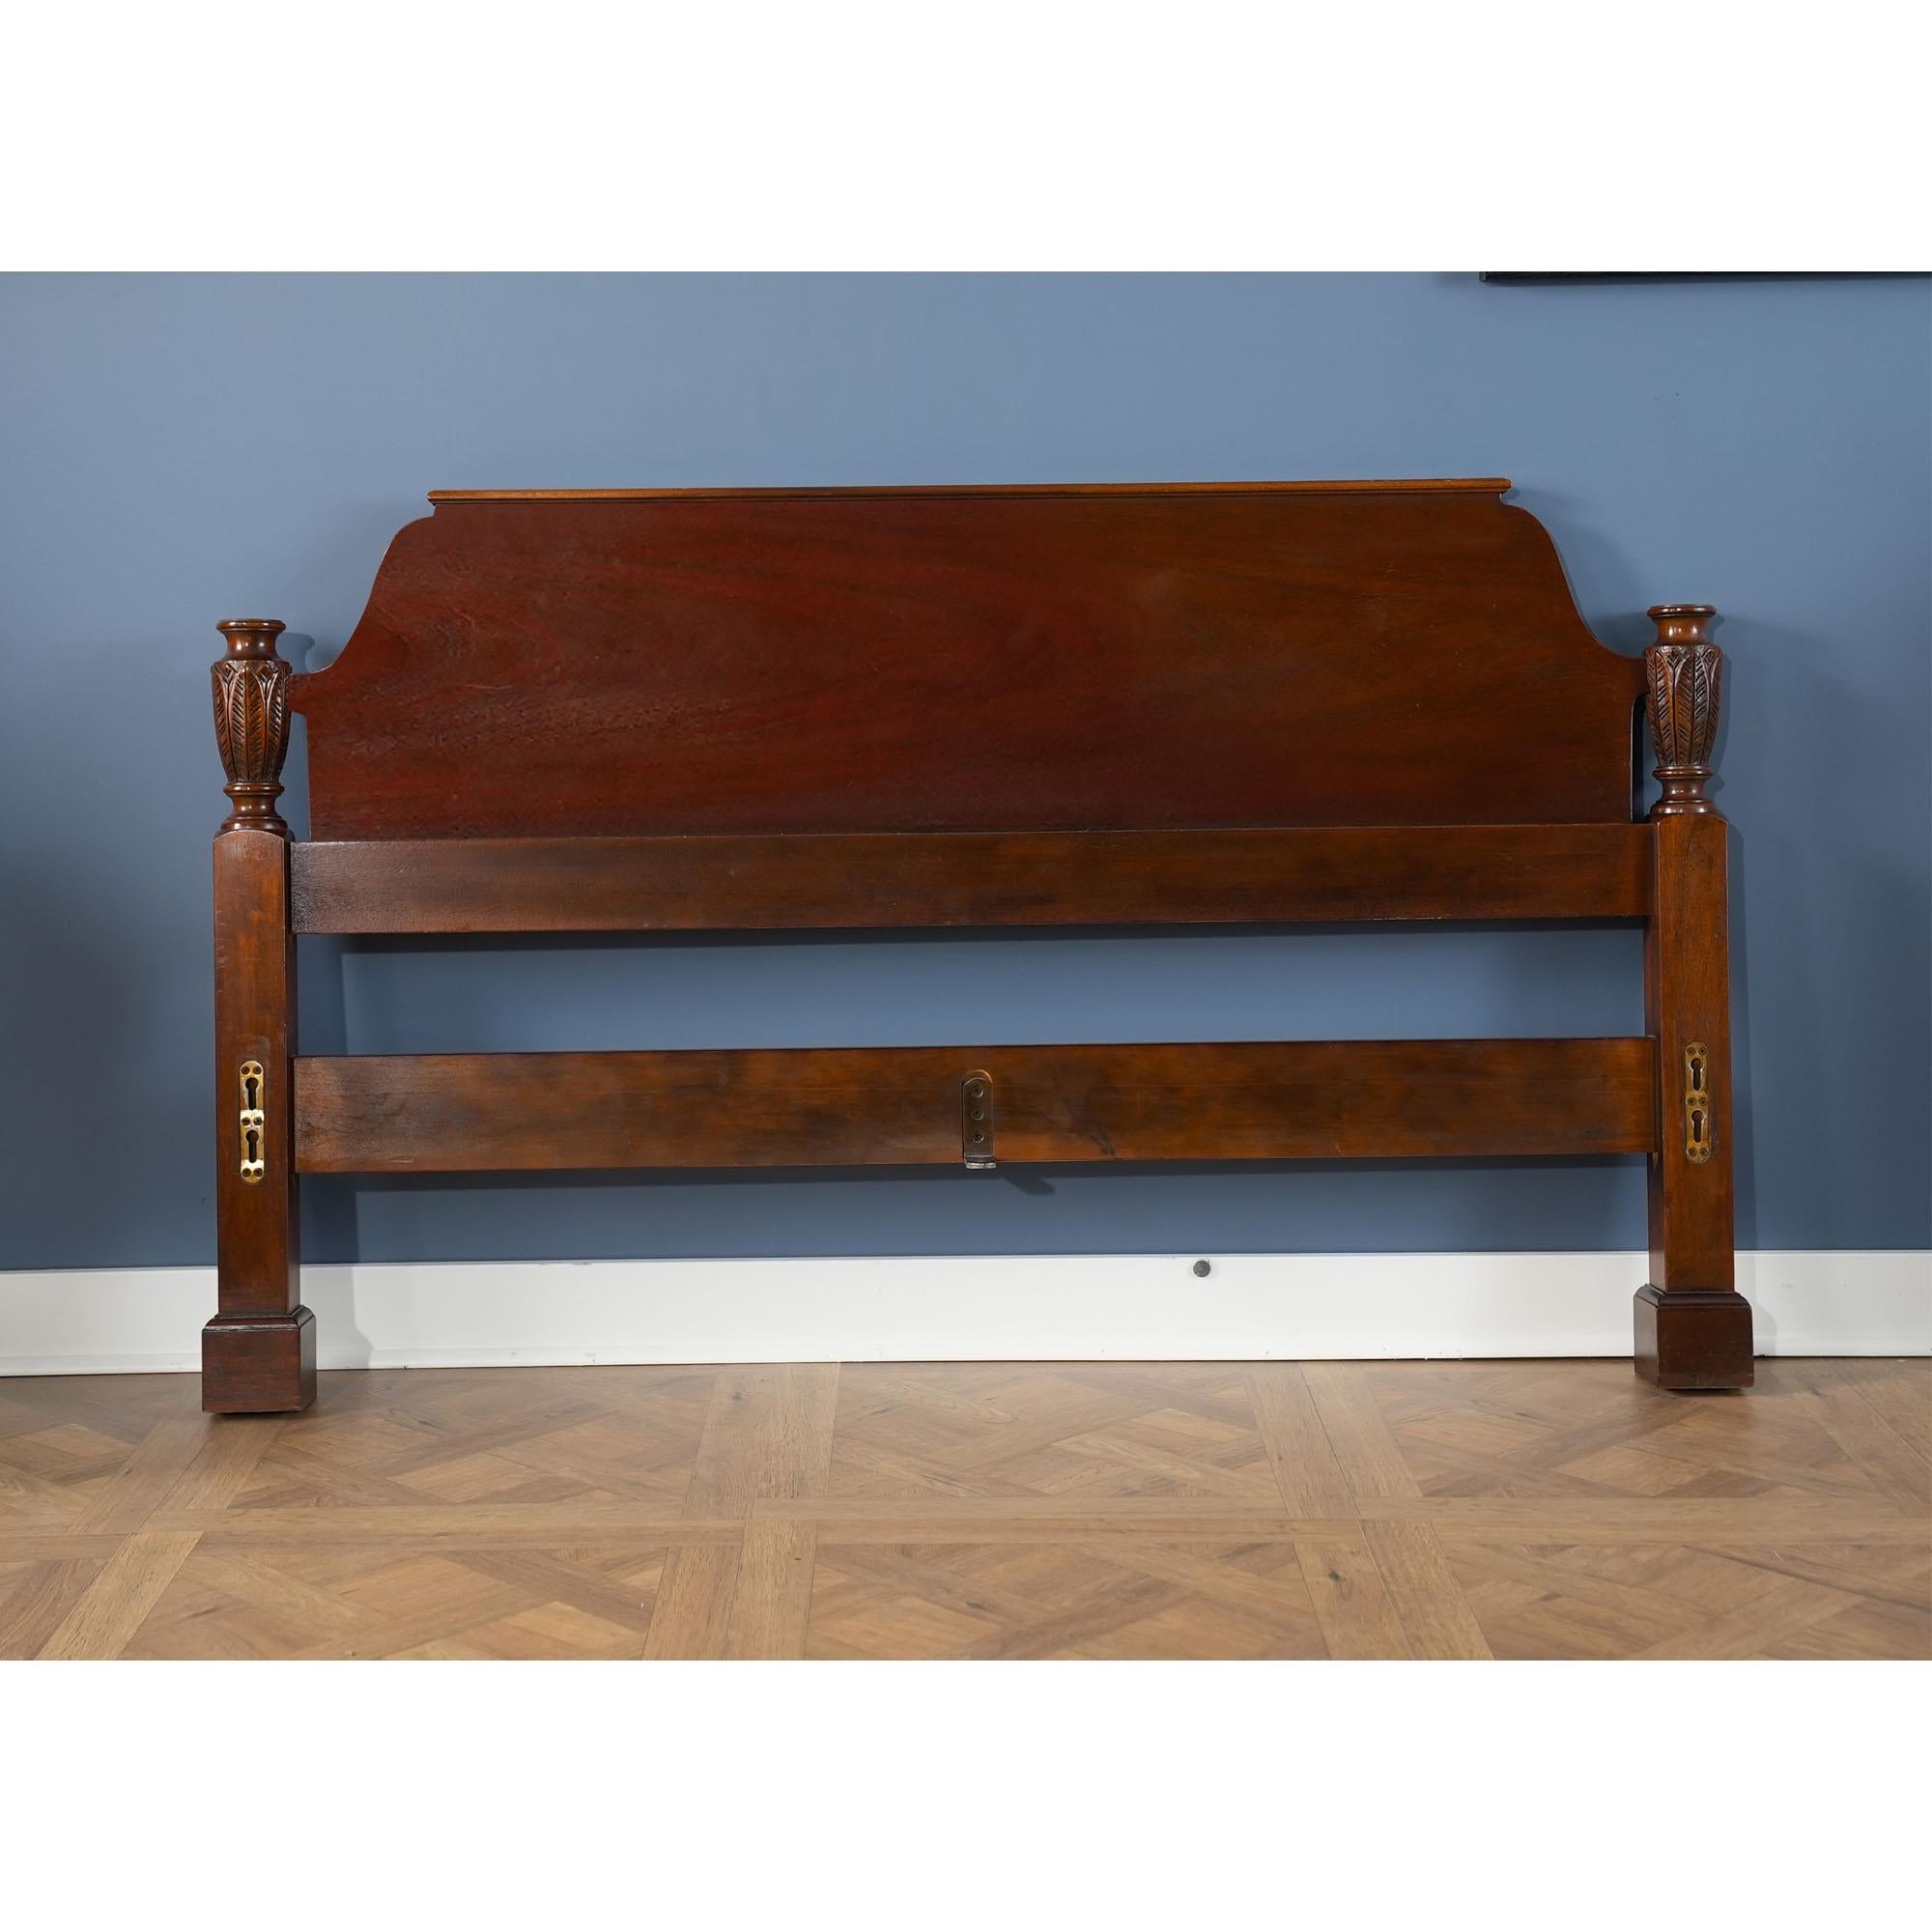 A vintage Baker Queen Size Mahogany Poster Bed which will be the focal point of any bed room in which it is placed. From the beautifully tapered finials and posts all of the way down to the solid square legs this bed has a great traditional look